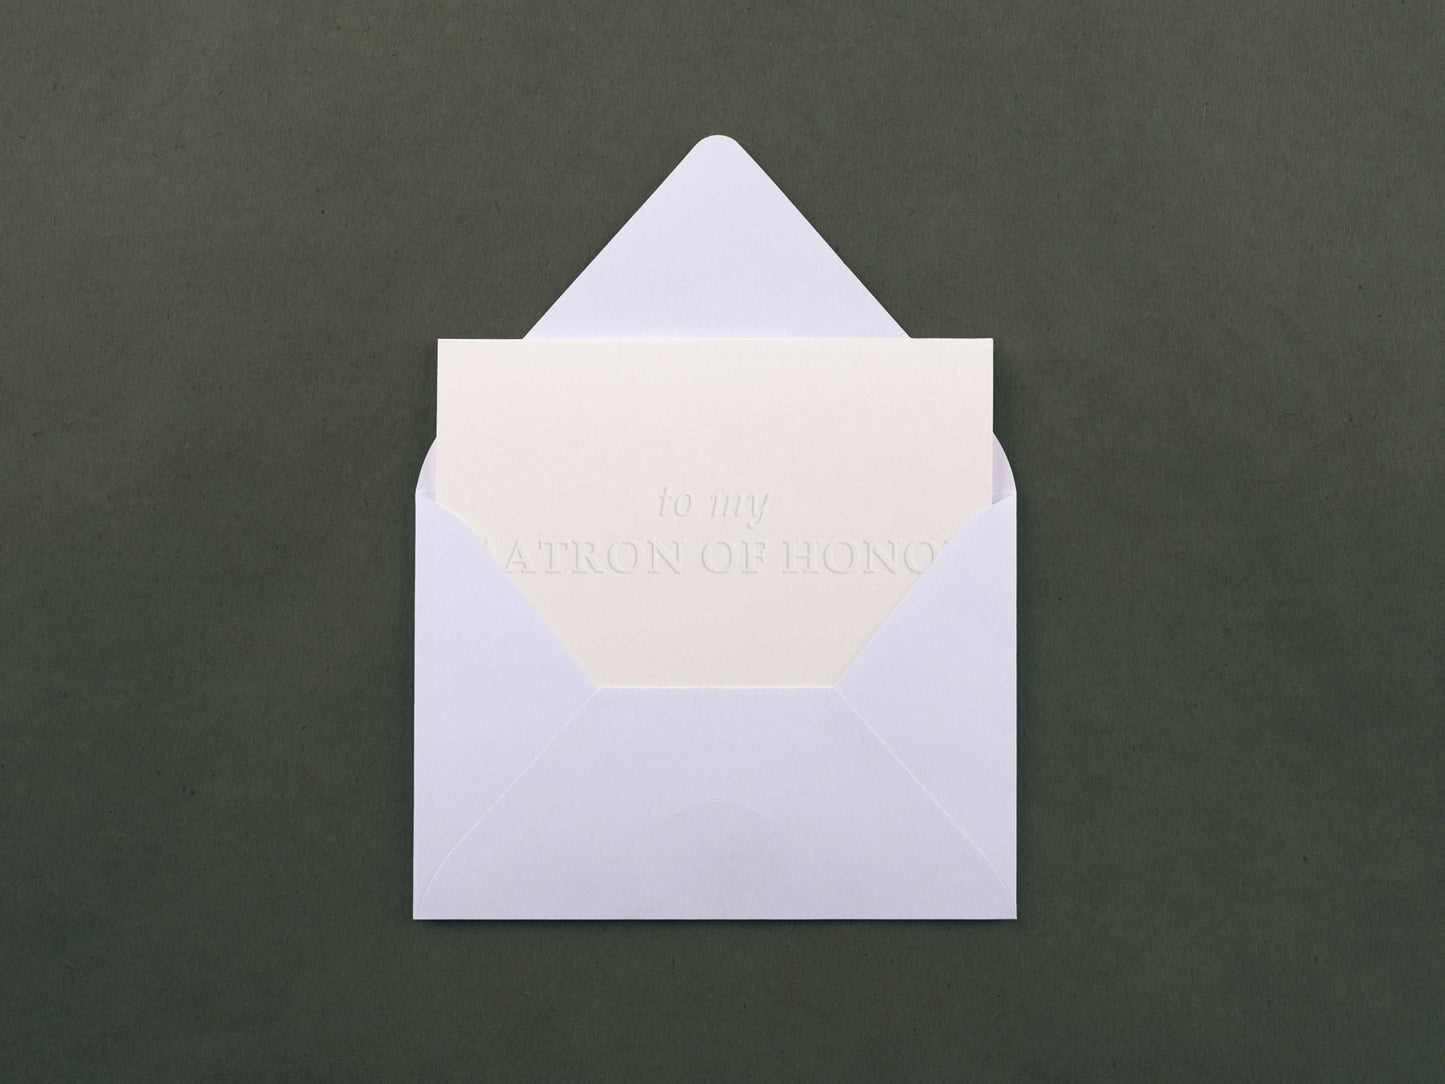 Embossed to my MATRON OF HONOR Wedding Day Card